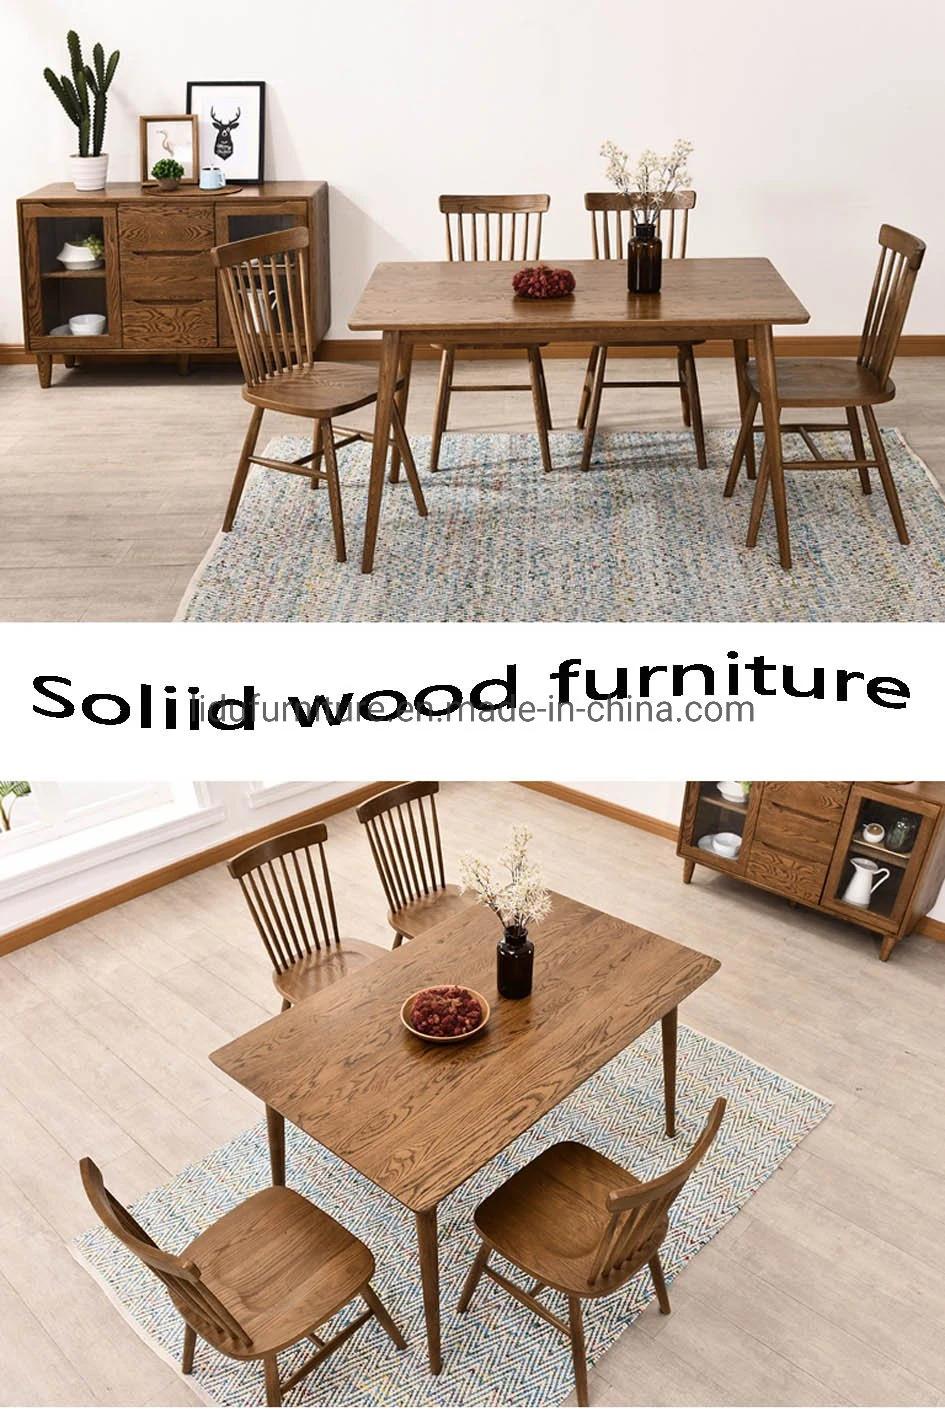 Wooden Dining Tables for Sale Timeless Chair Dining Room Set Home Solid Wood Table Large Table